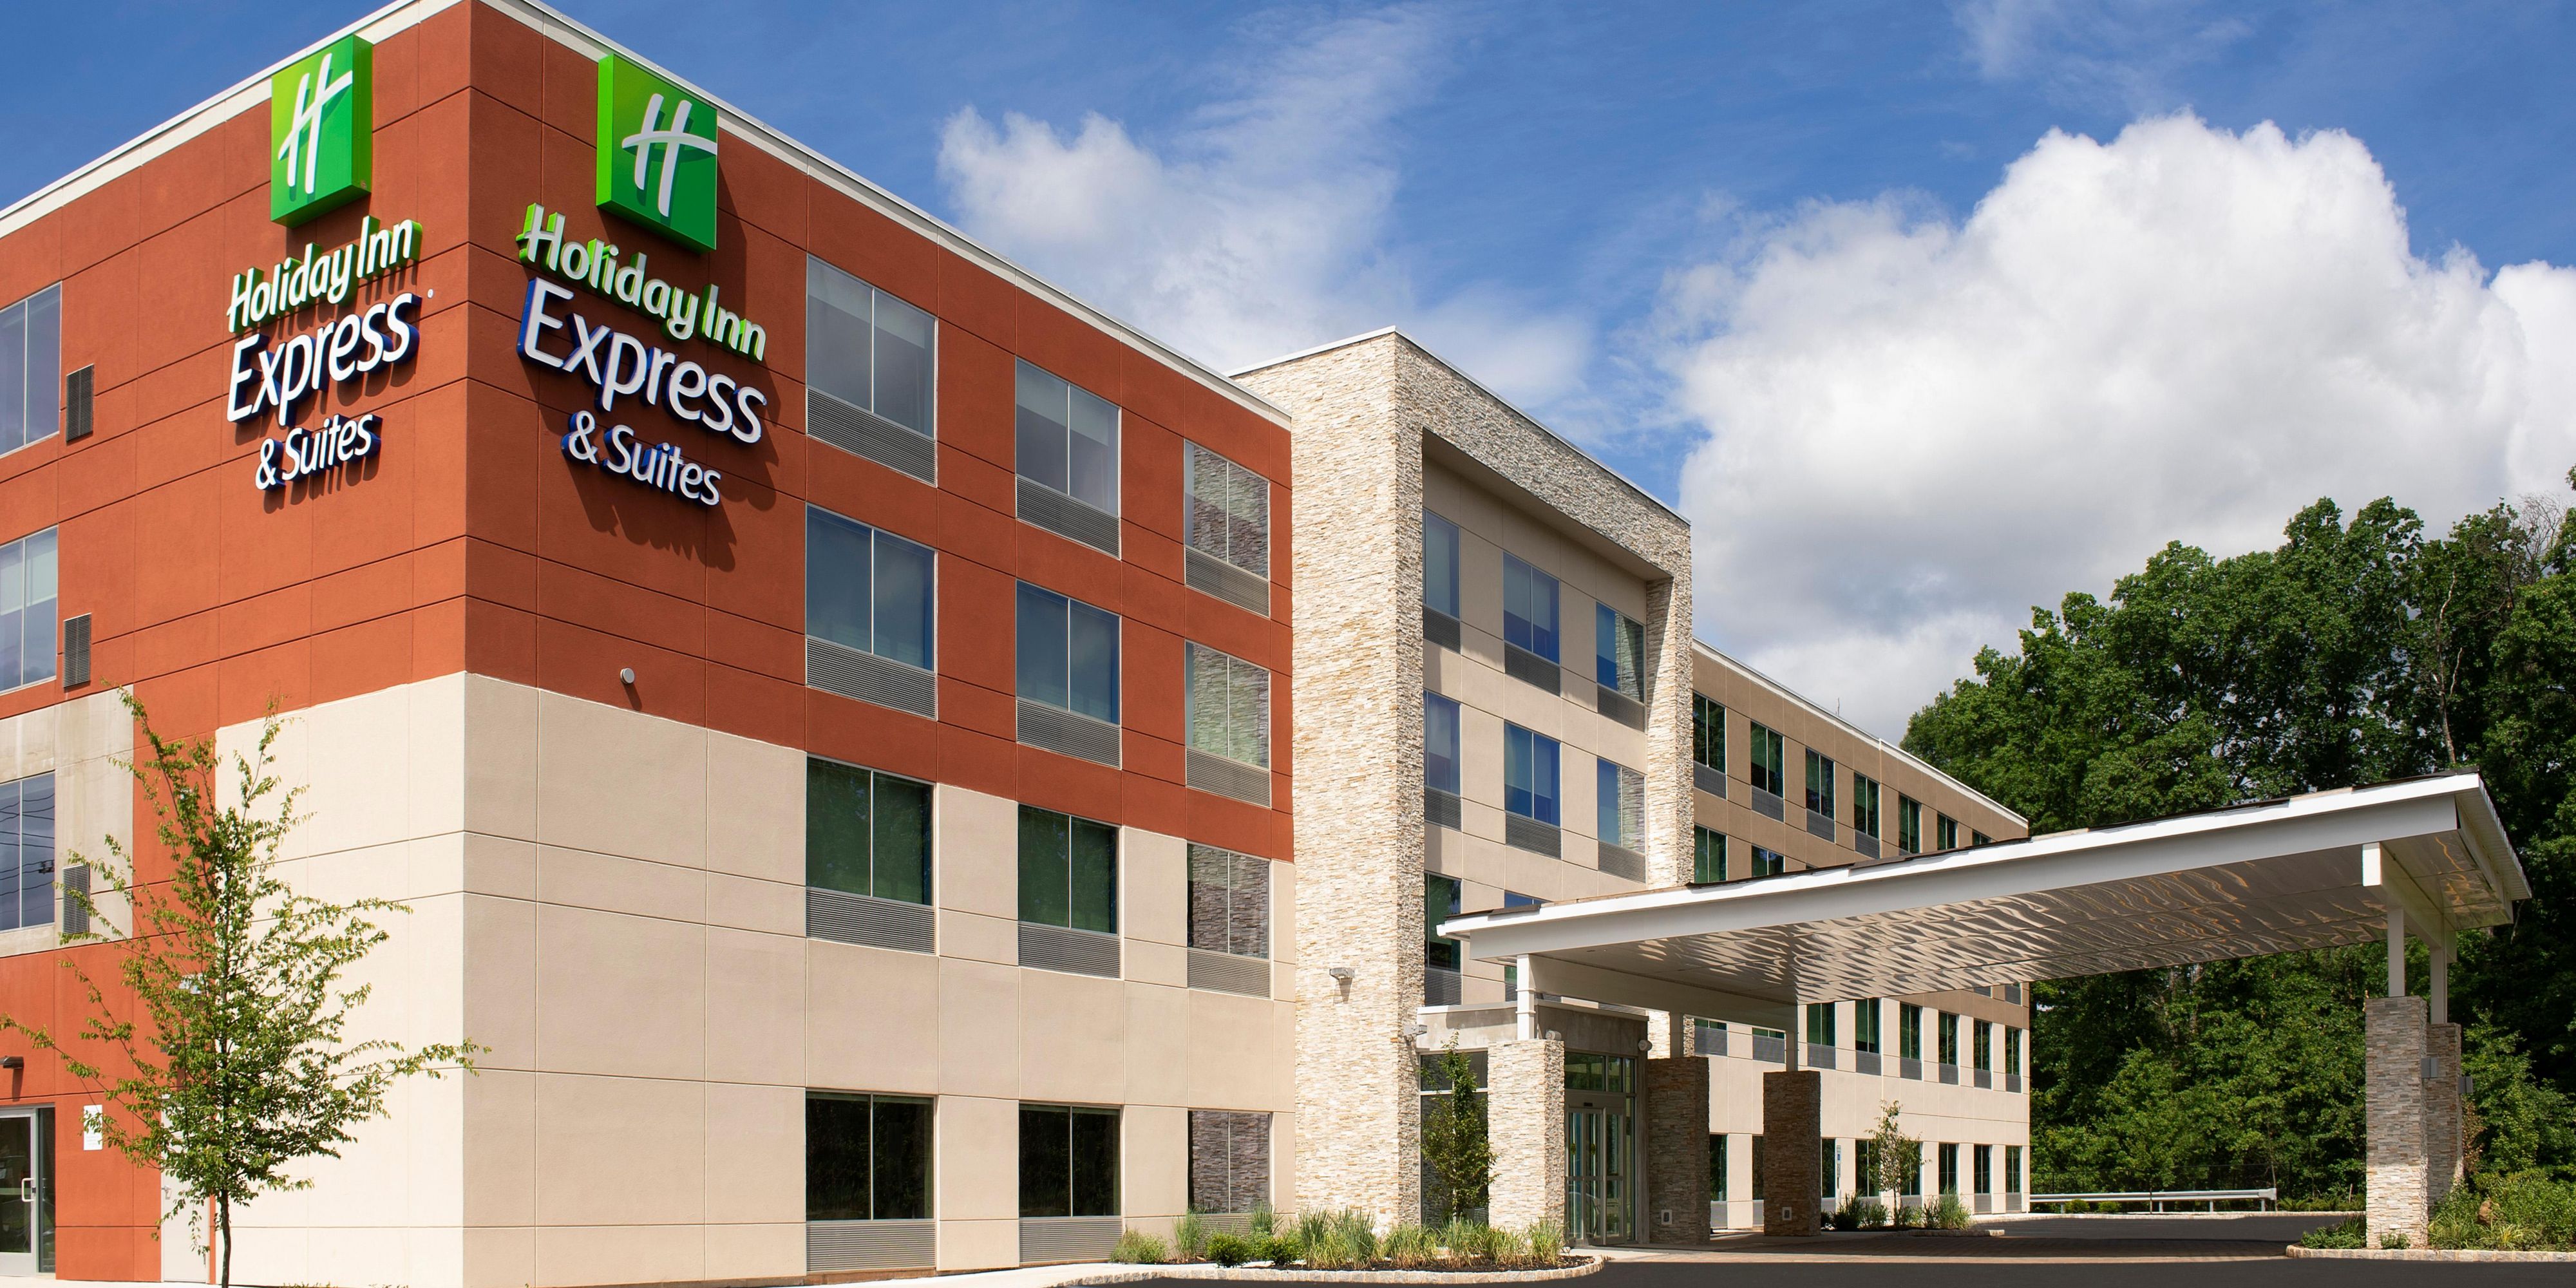 Fun for All! Holiday Inn Express & Suites North Brunswick hotel is a short drive from the thrills and fun of 6 Flags Great Adventure.